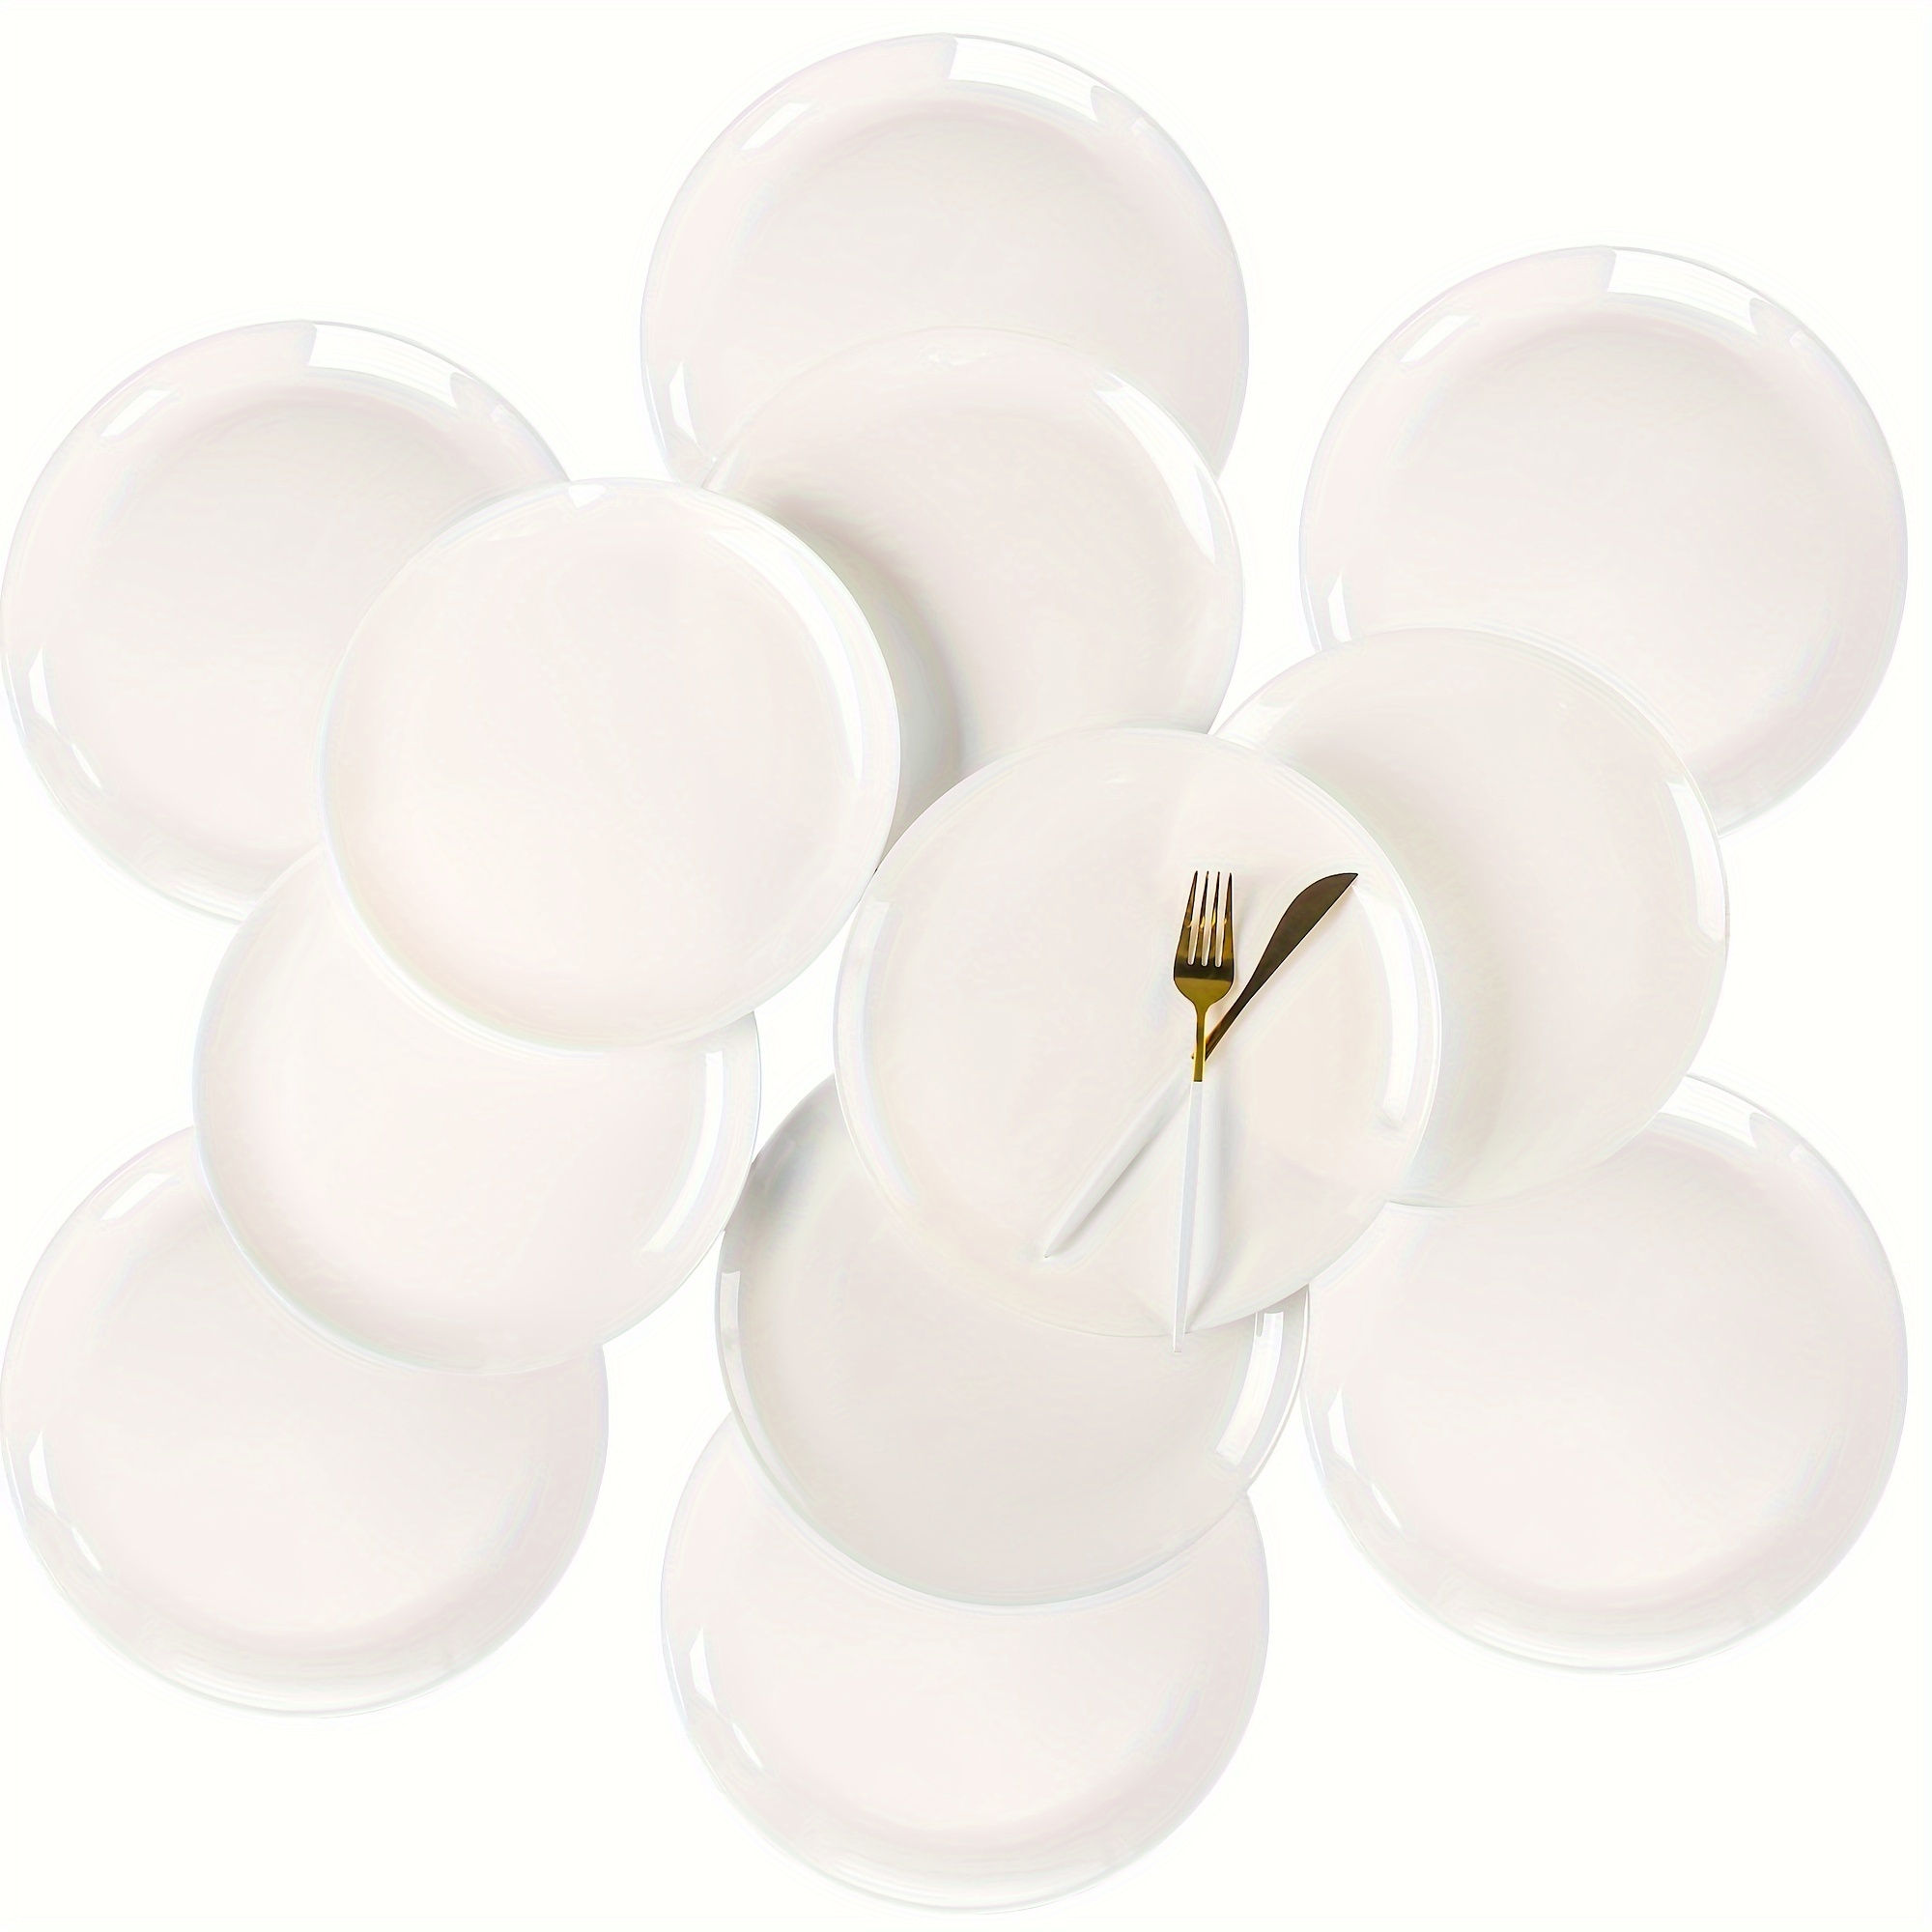 

6/12 Pack Dinner Plates, Tempered Glass White Plates, 10-1/2-inch Round Dish Set, Microwave & Dishwasher Safe Glass Plate Set